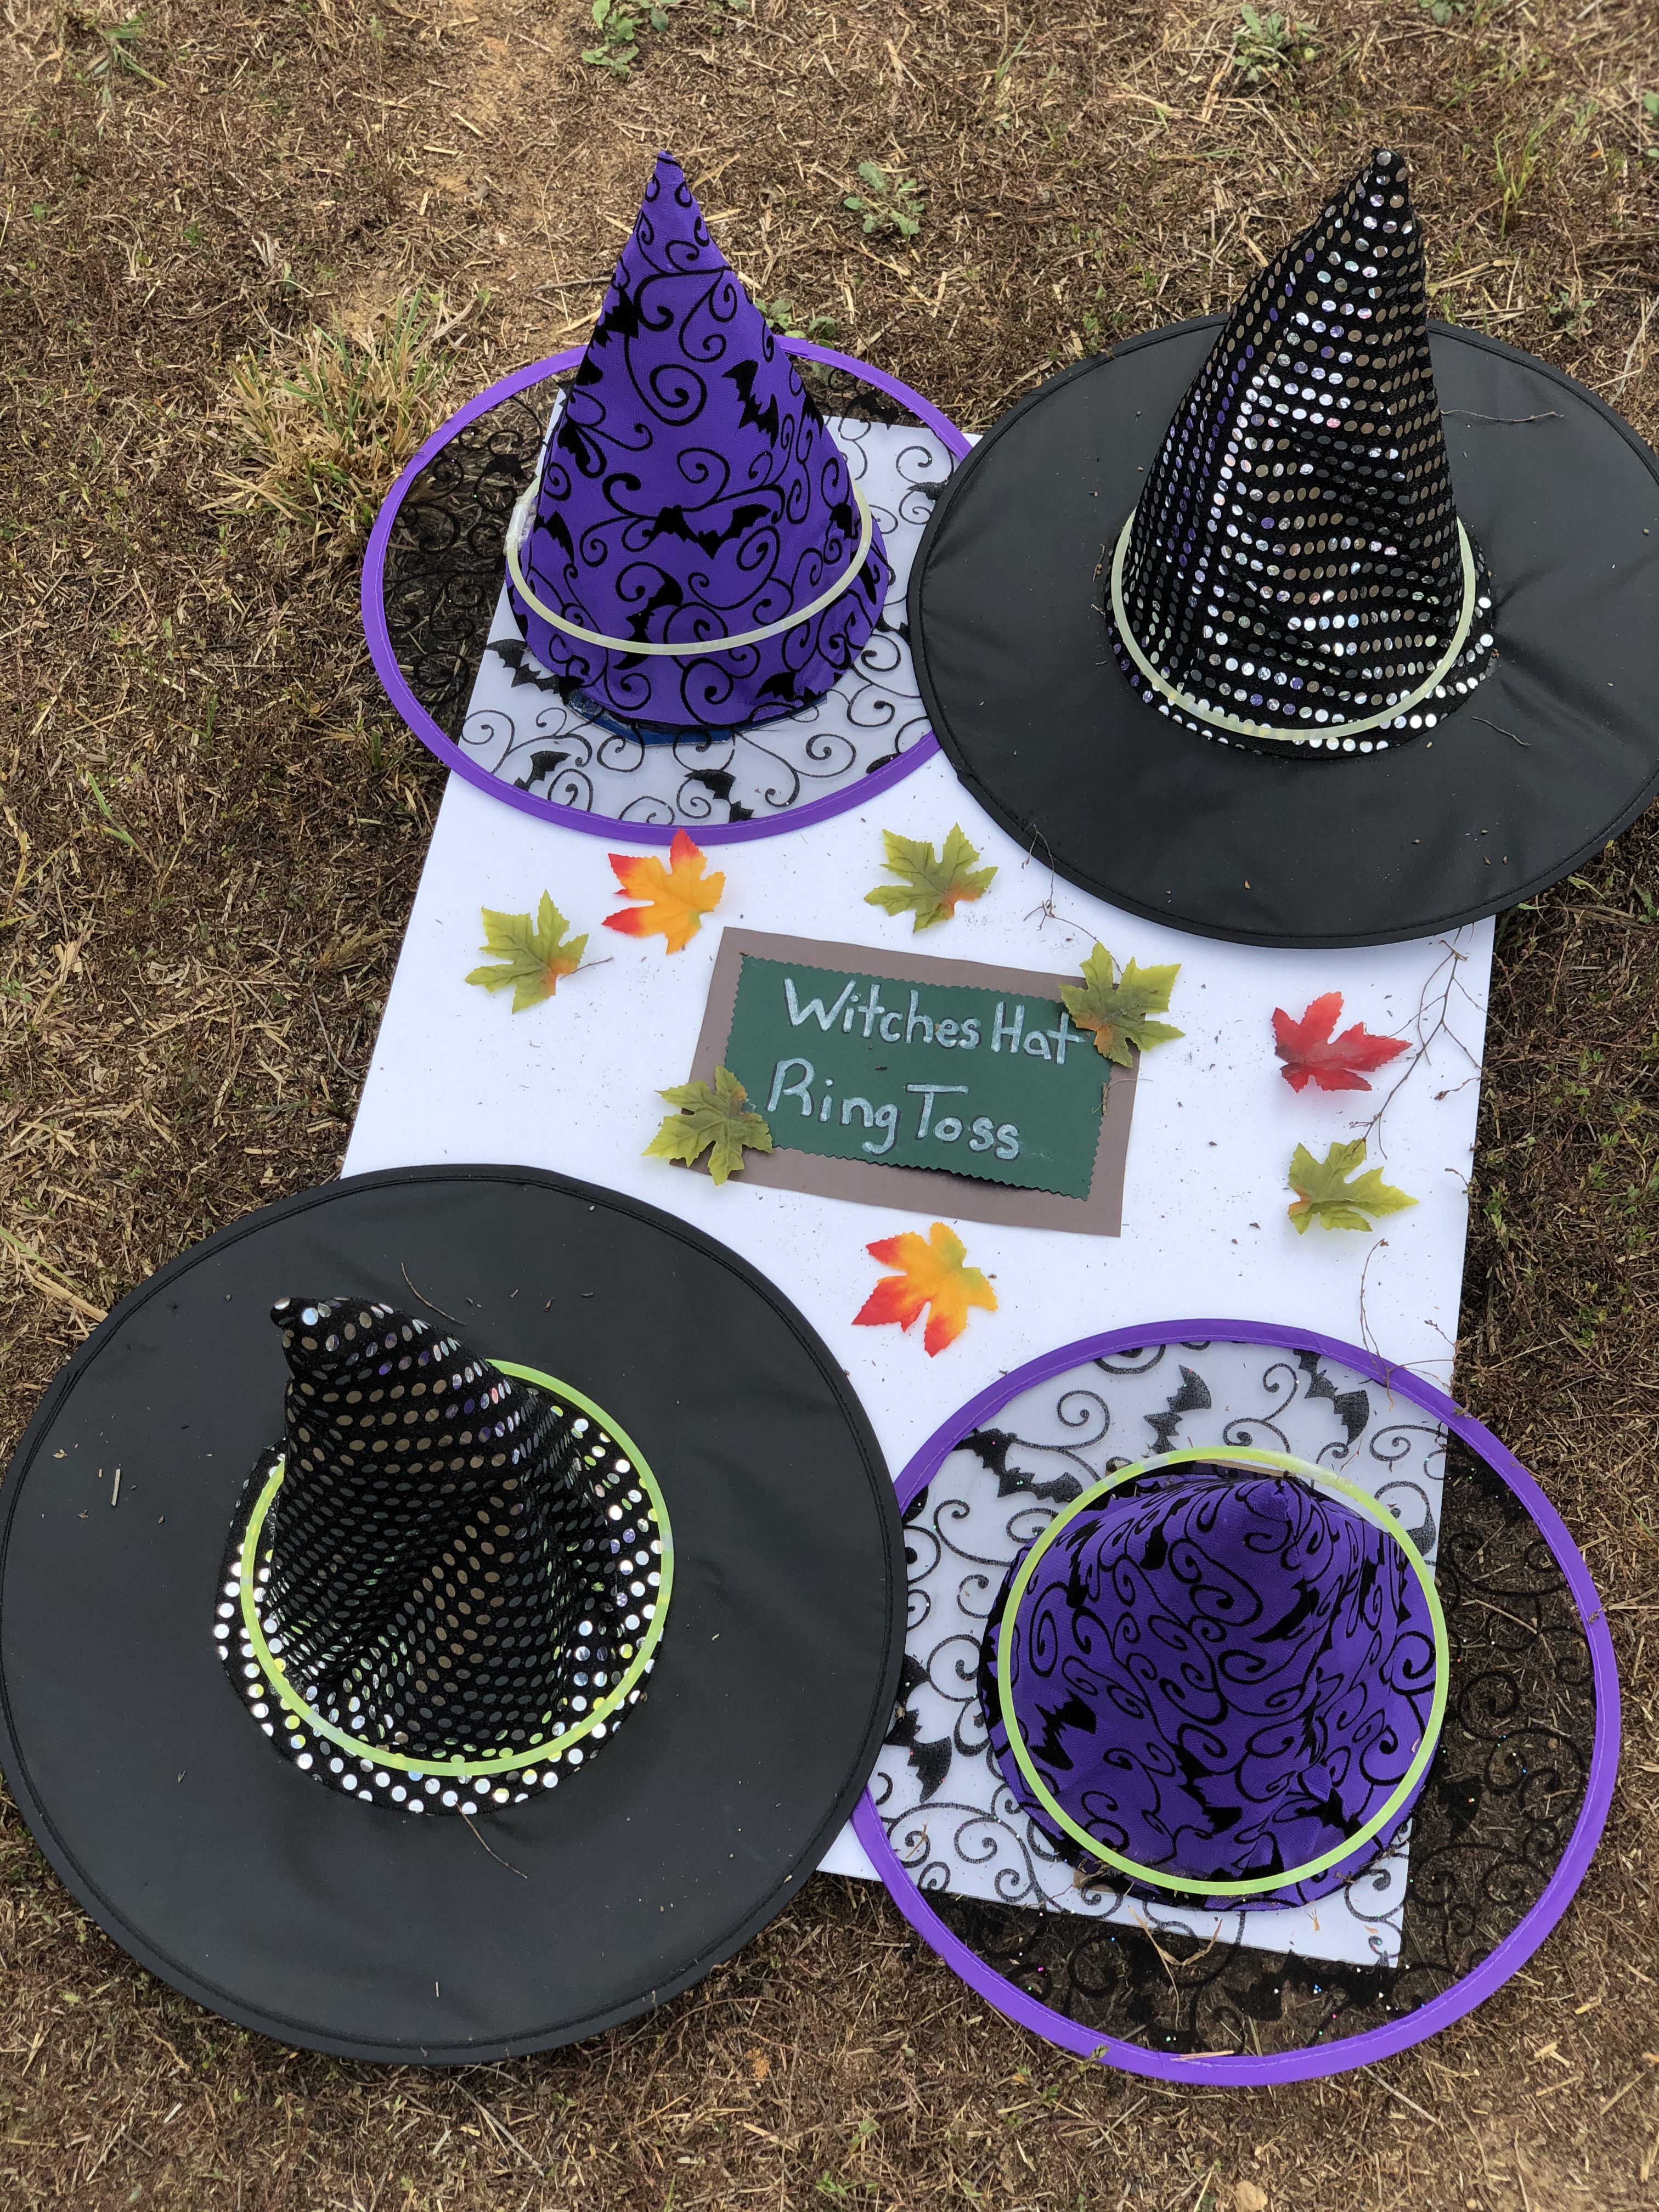 Halloween Games for Kids - Witches Hat Ring Toss - Fun Kids Games via Misty Nelson, mom blogger @frostedevents